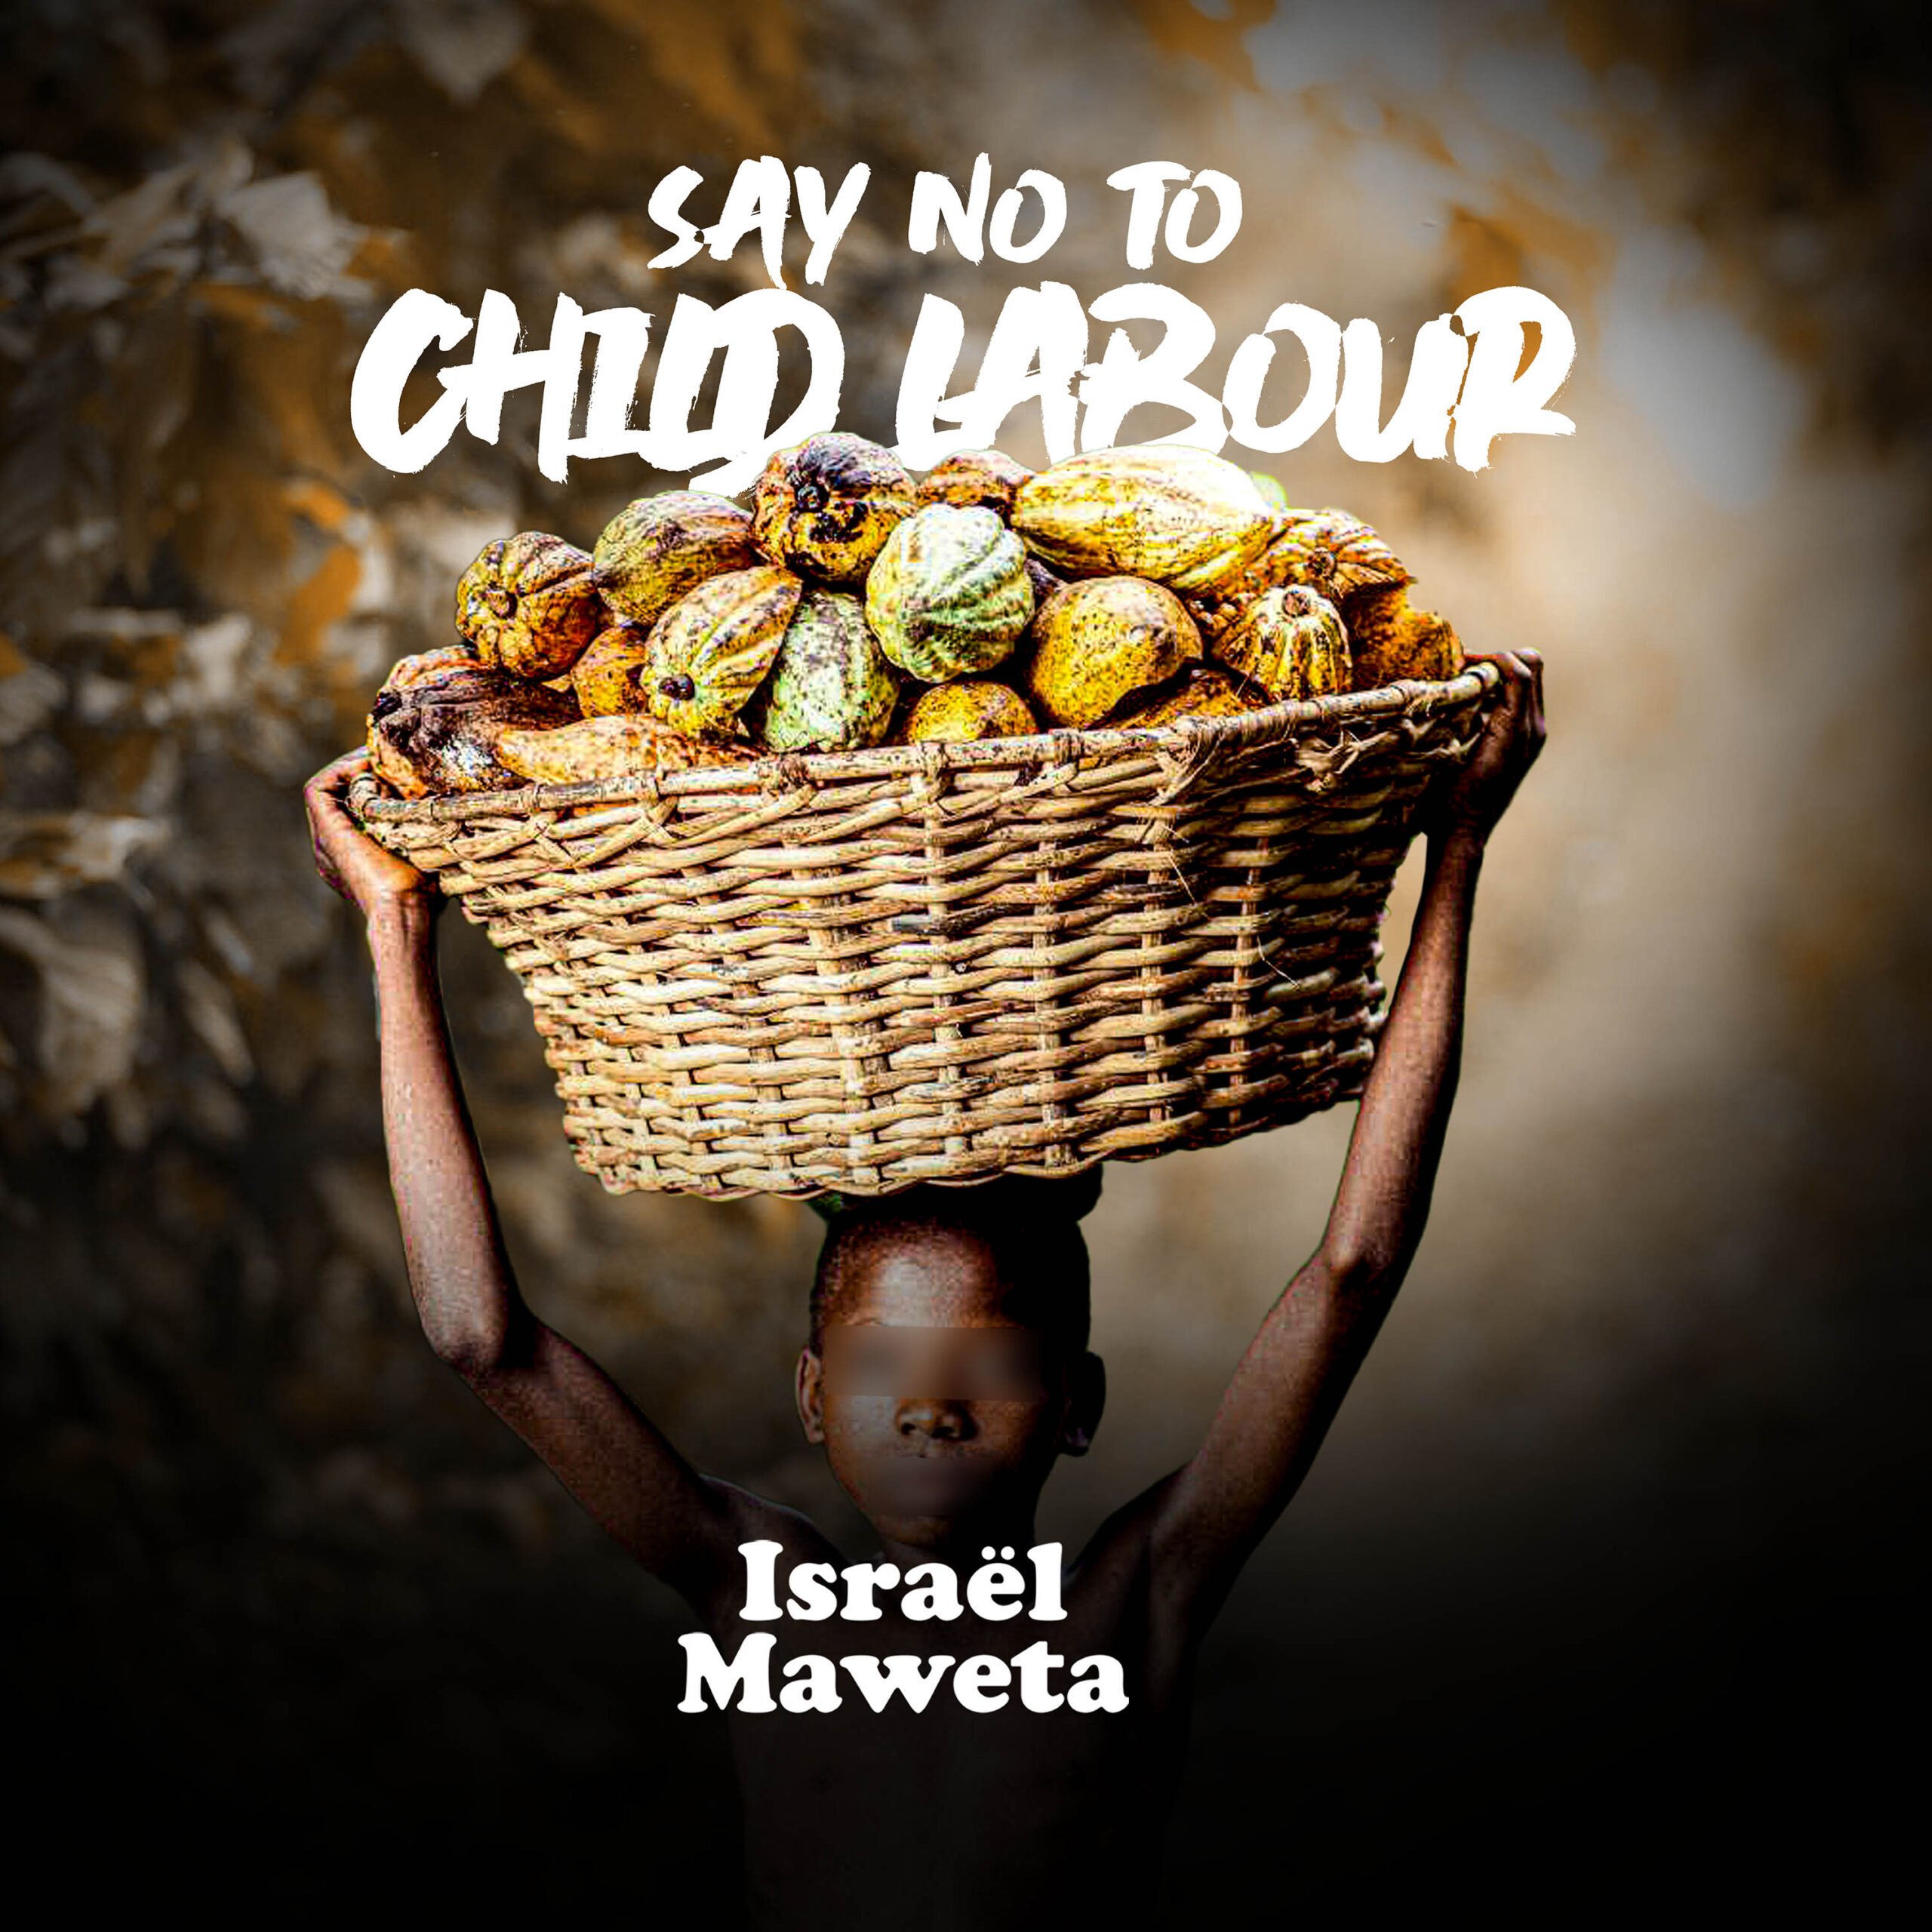 ISRAEL MAWETA - SAY NO TO CHILD LABOUR